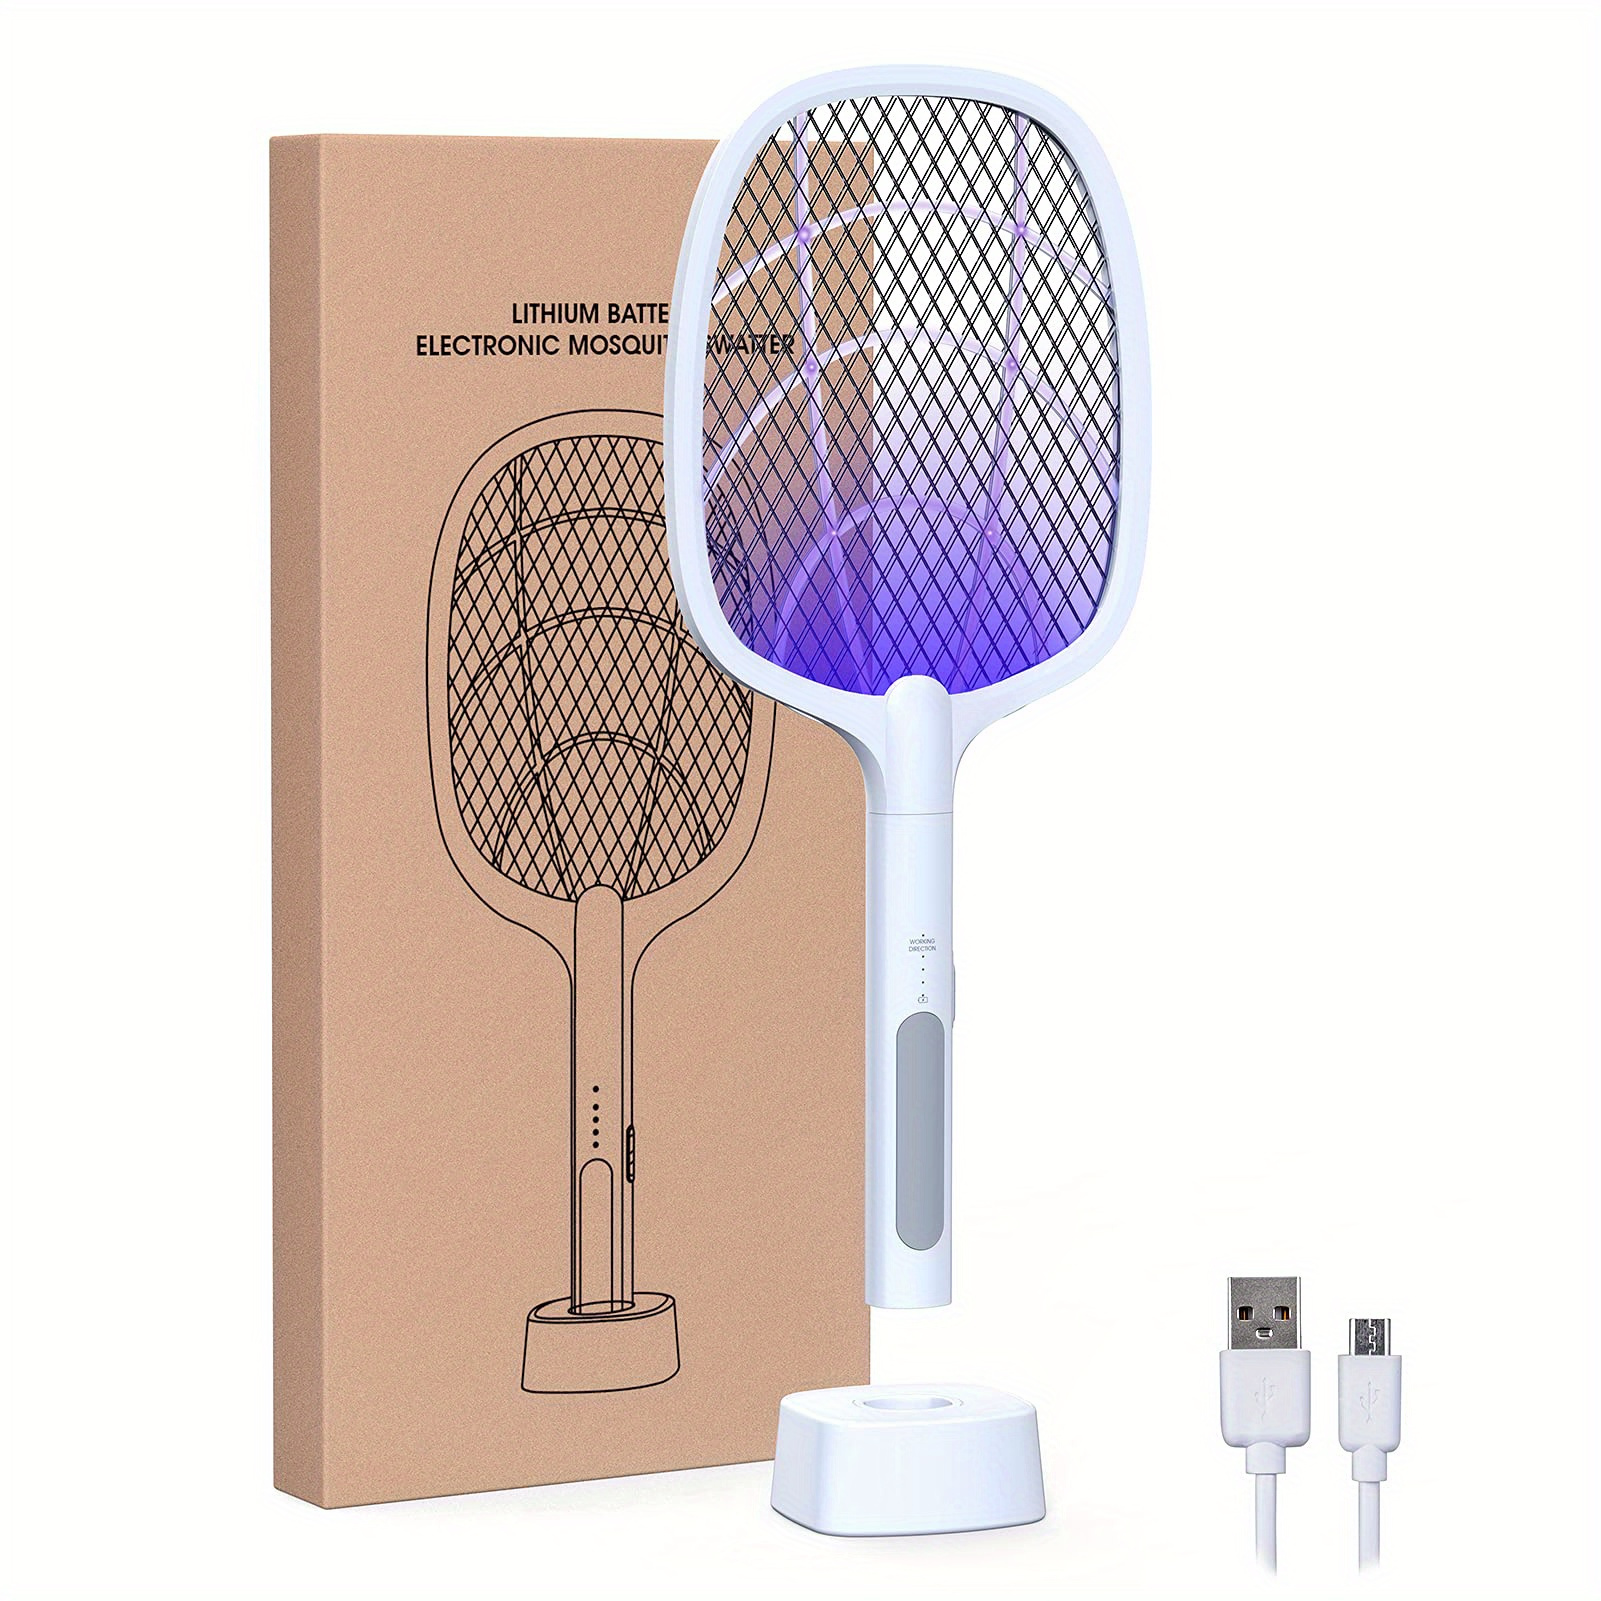 

2-in-1 Bug Zapper Racket And Fly Swatter, Rechargeable Electric Mosquito Zapper For Indoor And Outdoor Use